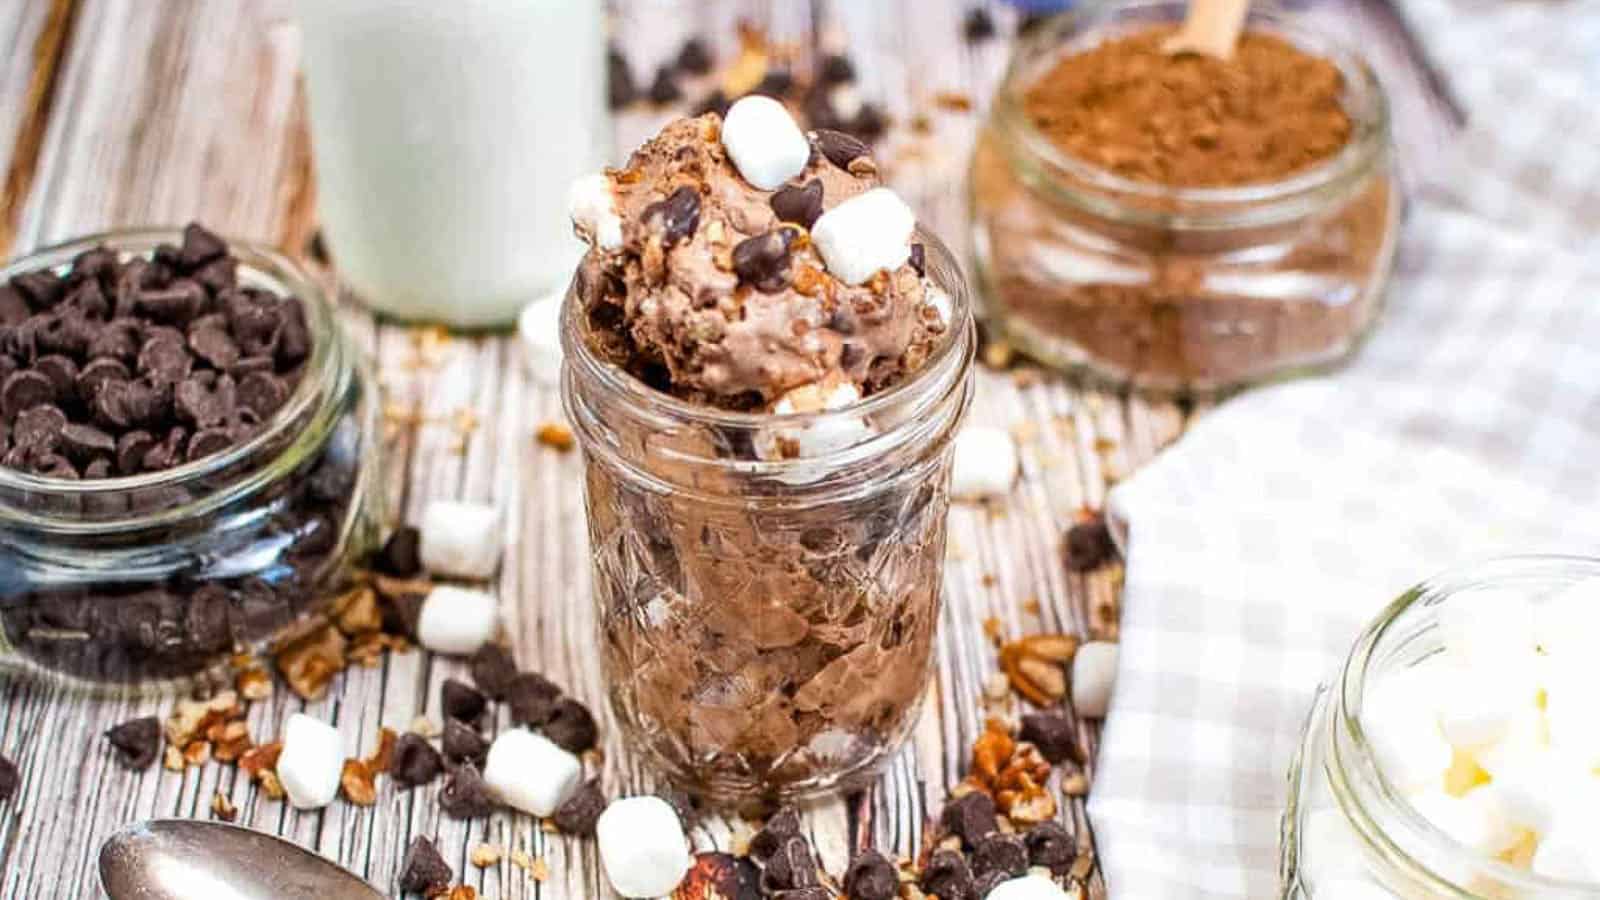 Low angle shot of rocky road ice cream in a canning jar with chocolate chips, marshmallows and nuts scattered about.